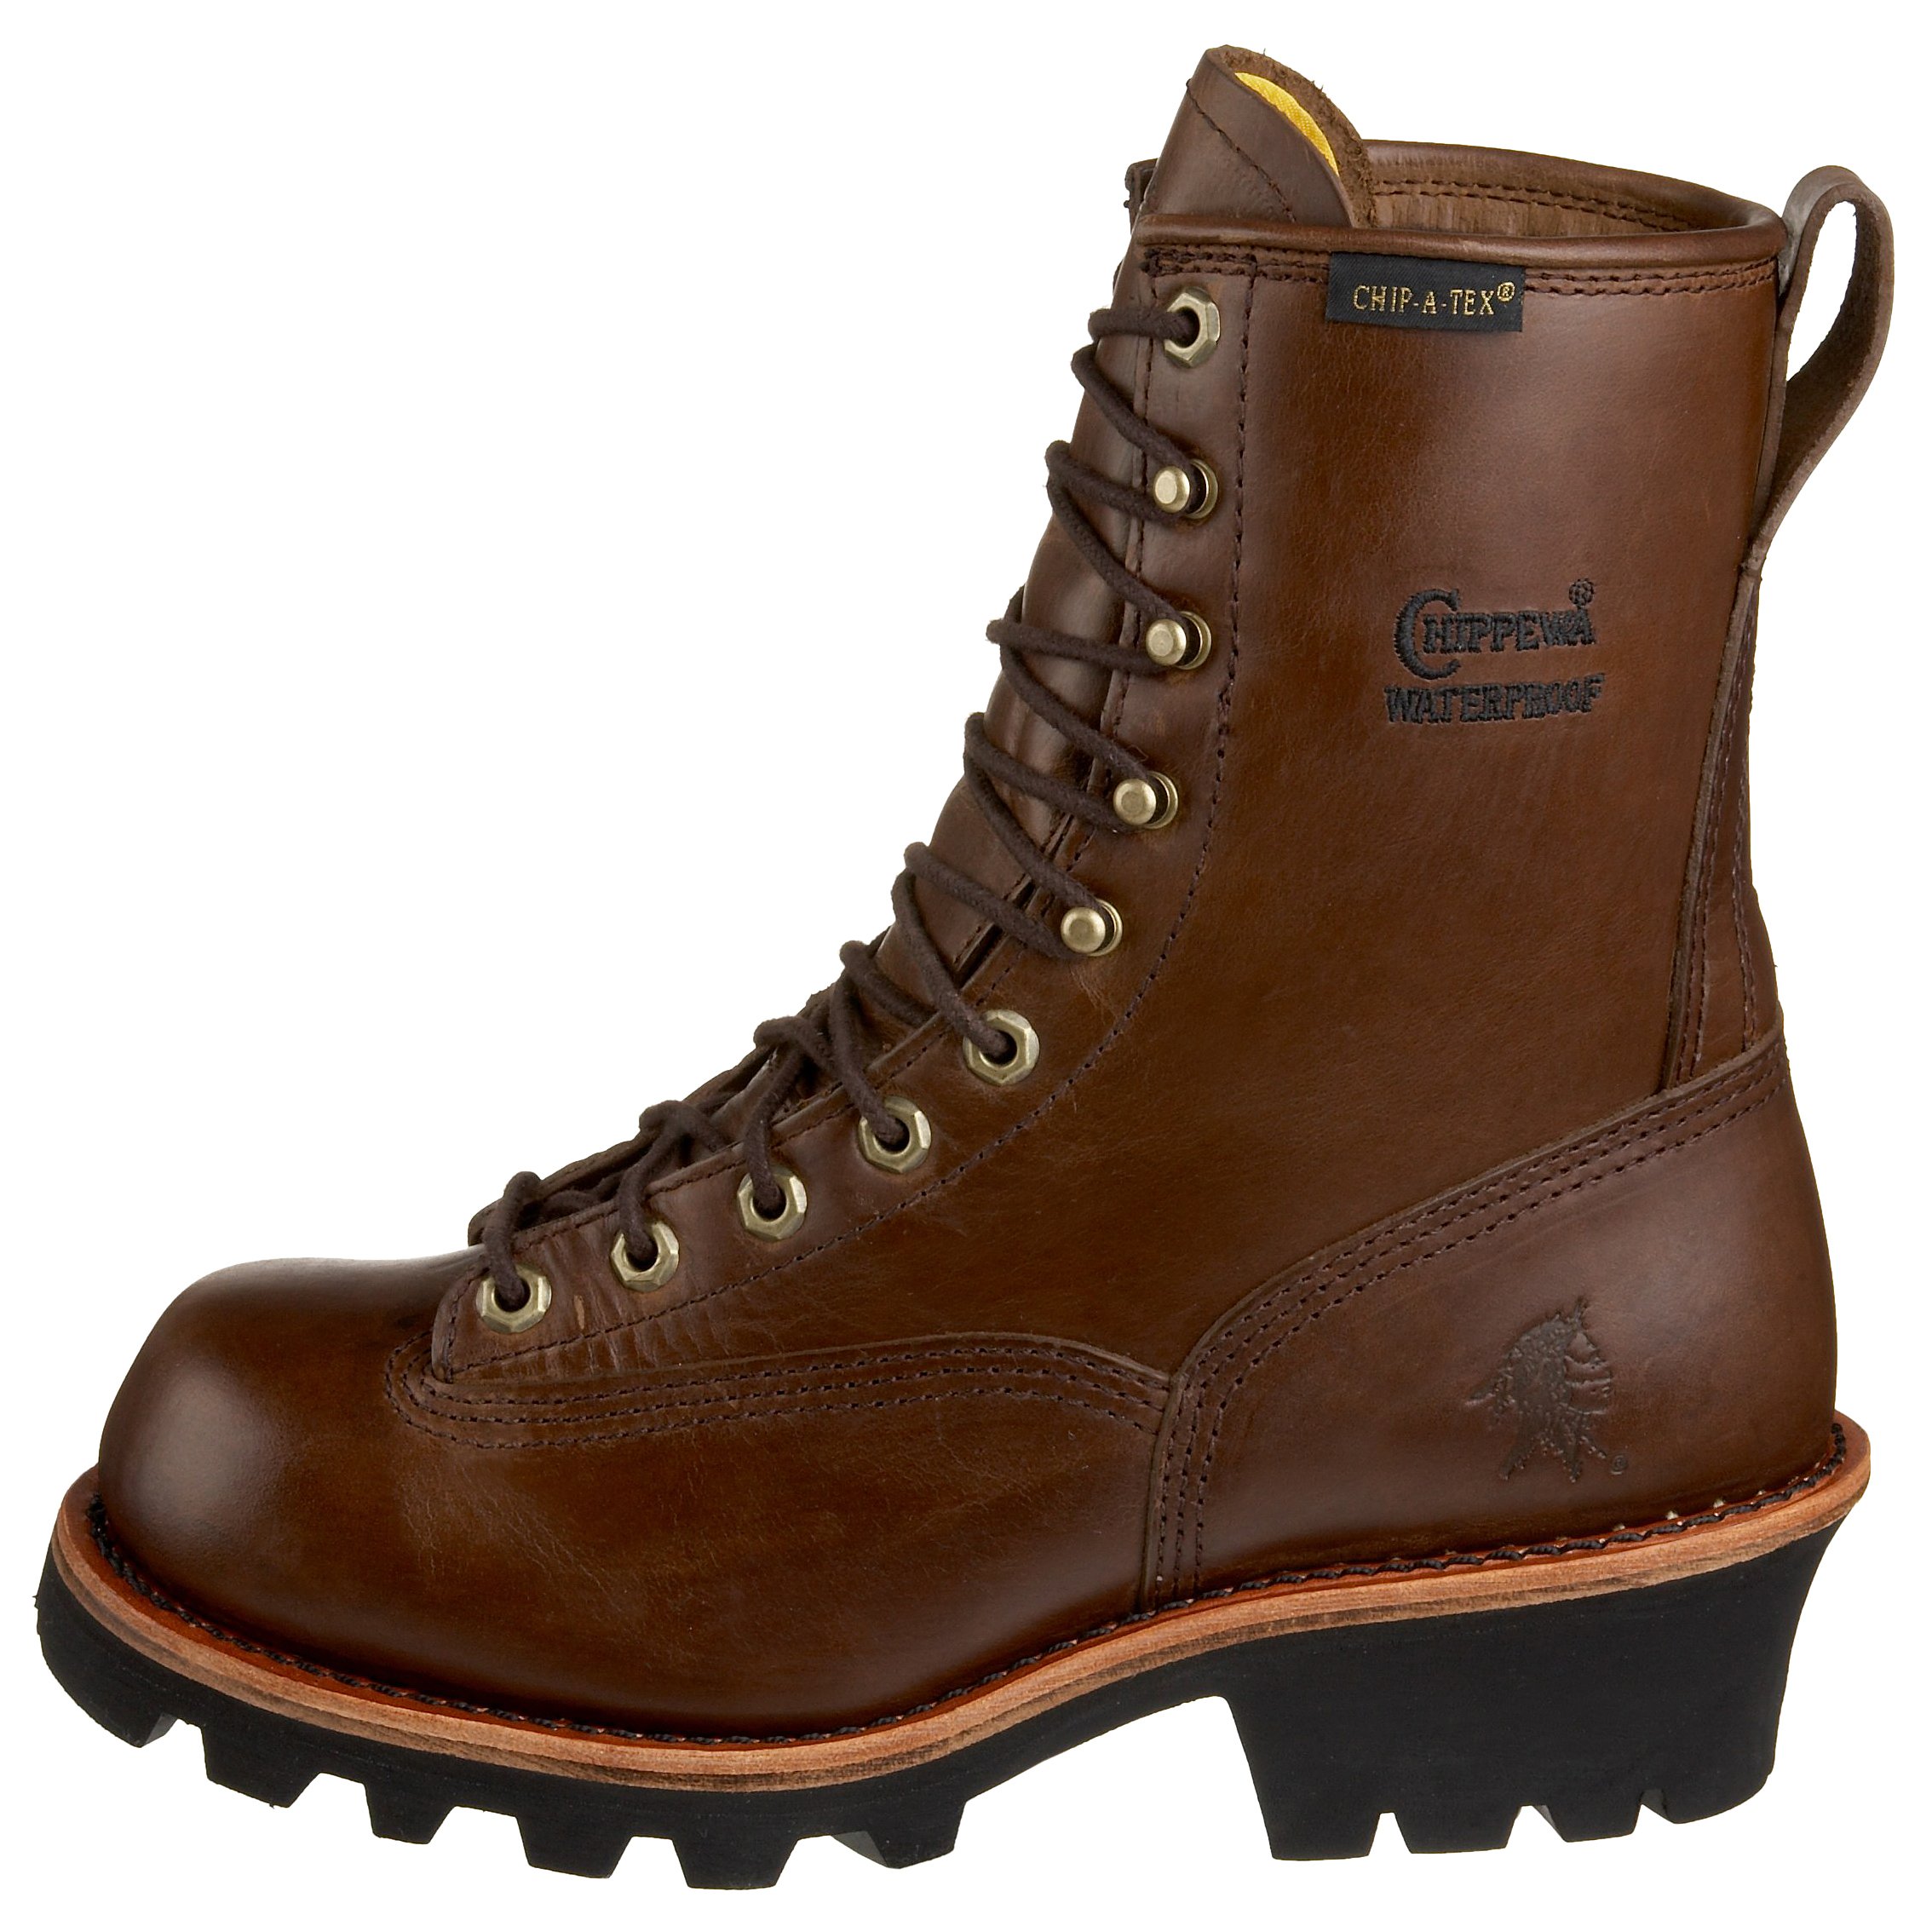 Chippewa Mens Paladin Bay Apache 8 Inch Waterproof Soft Toe Work Safety Shoes Casual - Brown